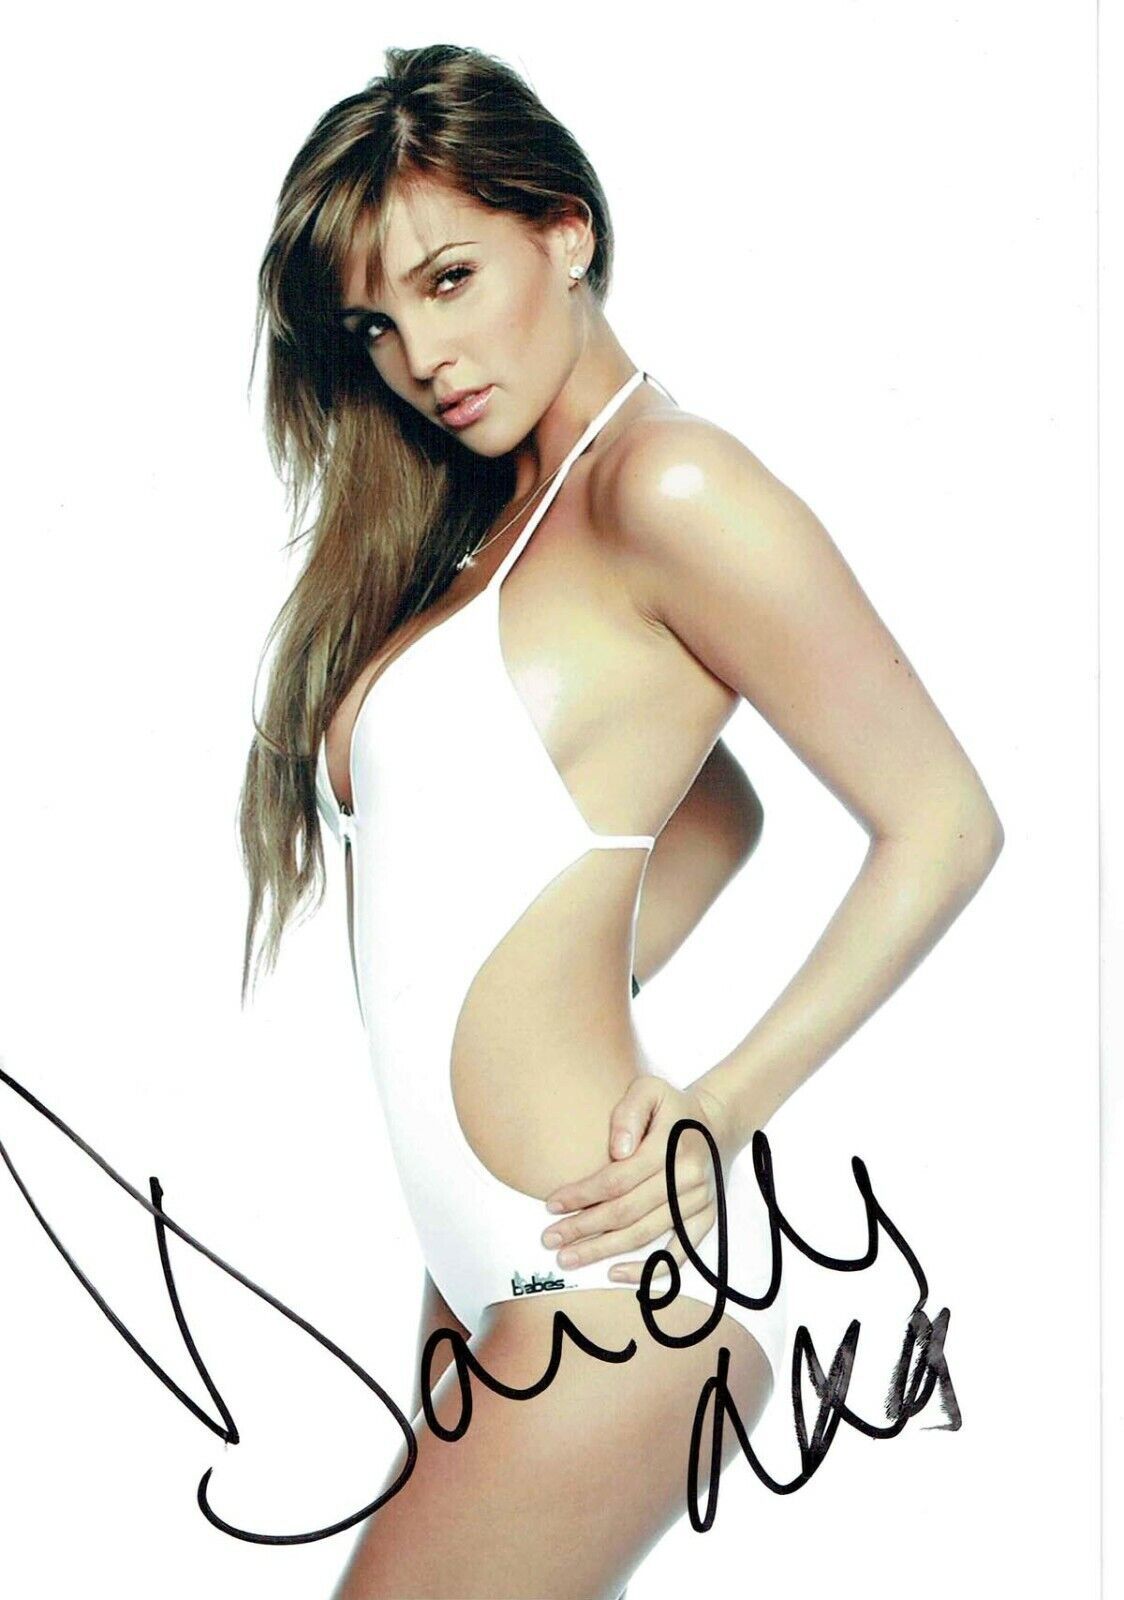 Danielle LLOYD Signed 12x8 Photo Poster painting A AFTAL COA Sexy Glamour Model Playboy